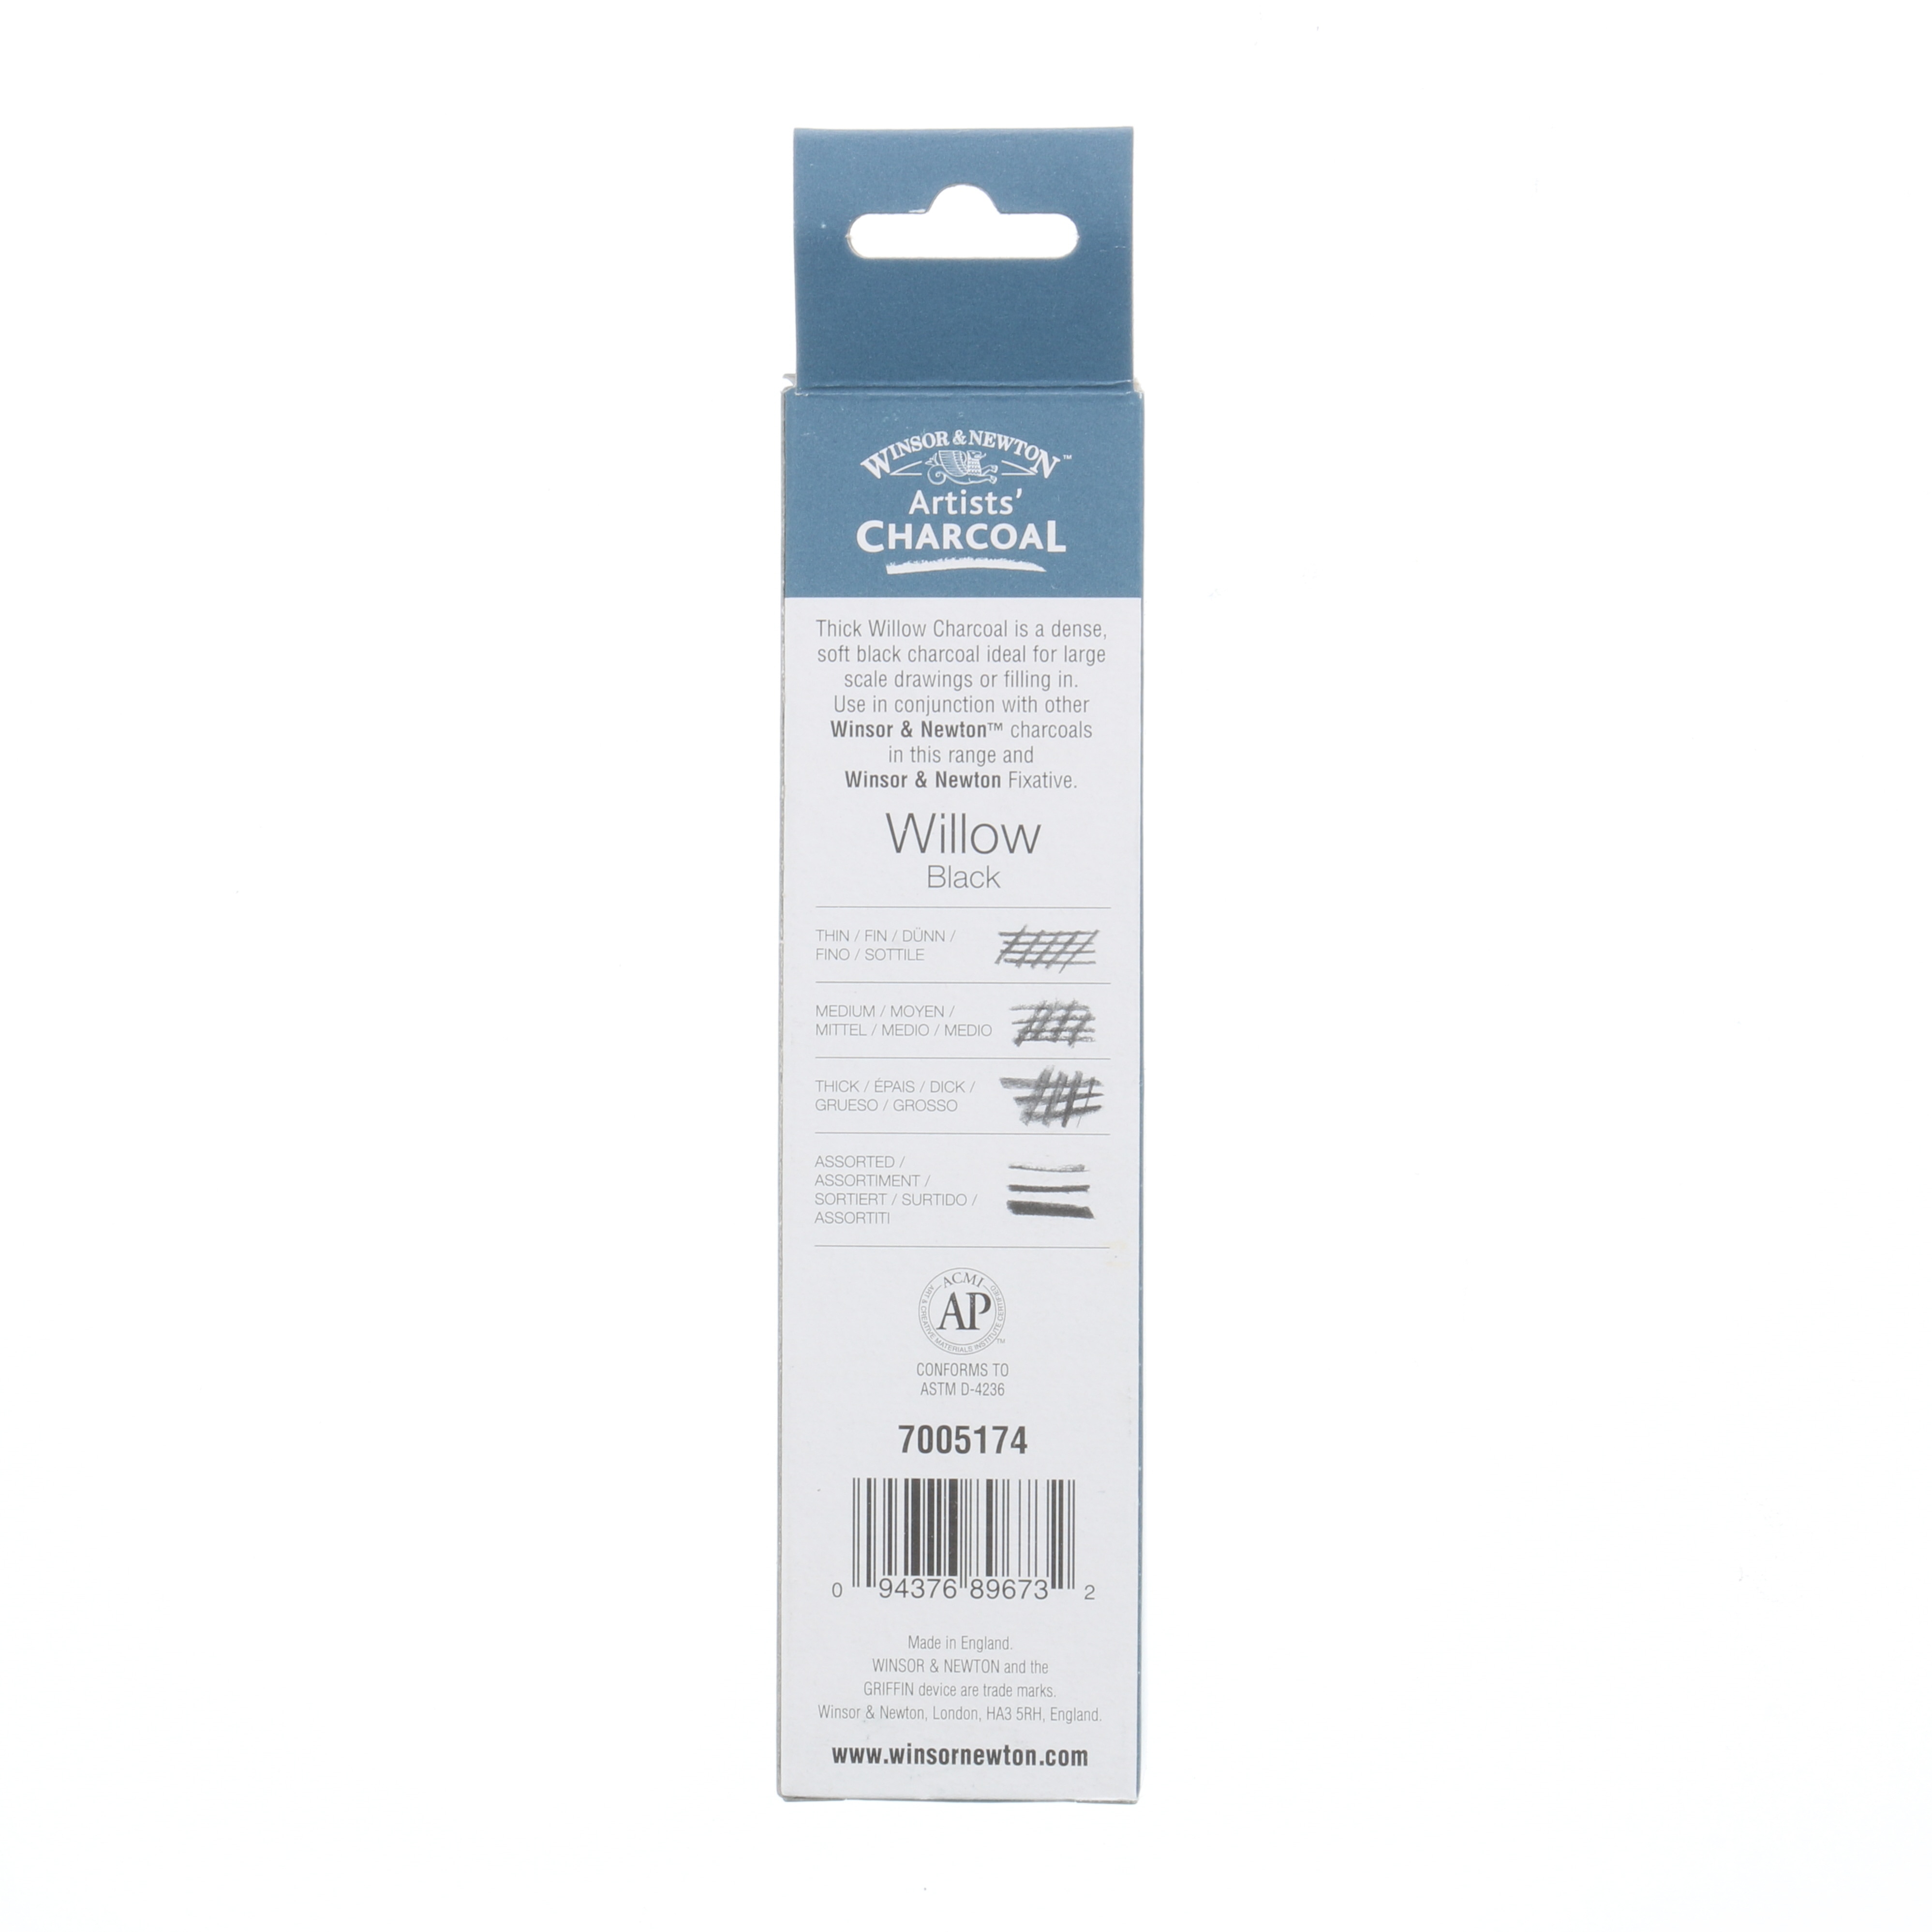 Winsor & Newton Charcoal Sticks, Willow Charcoal, Thick